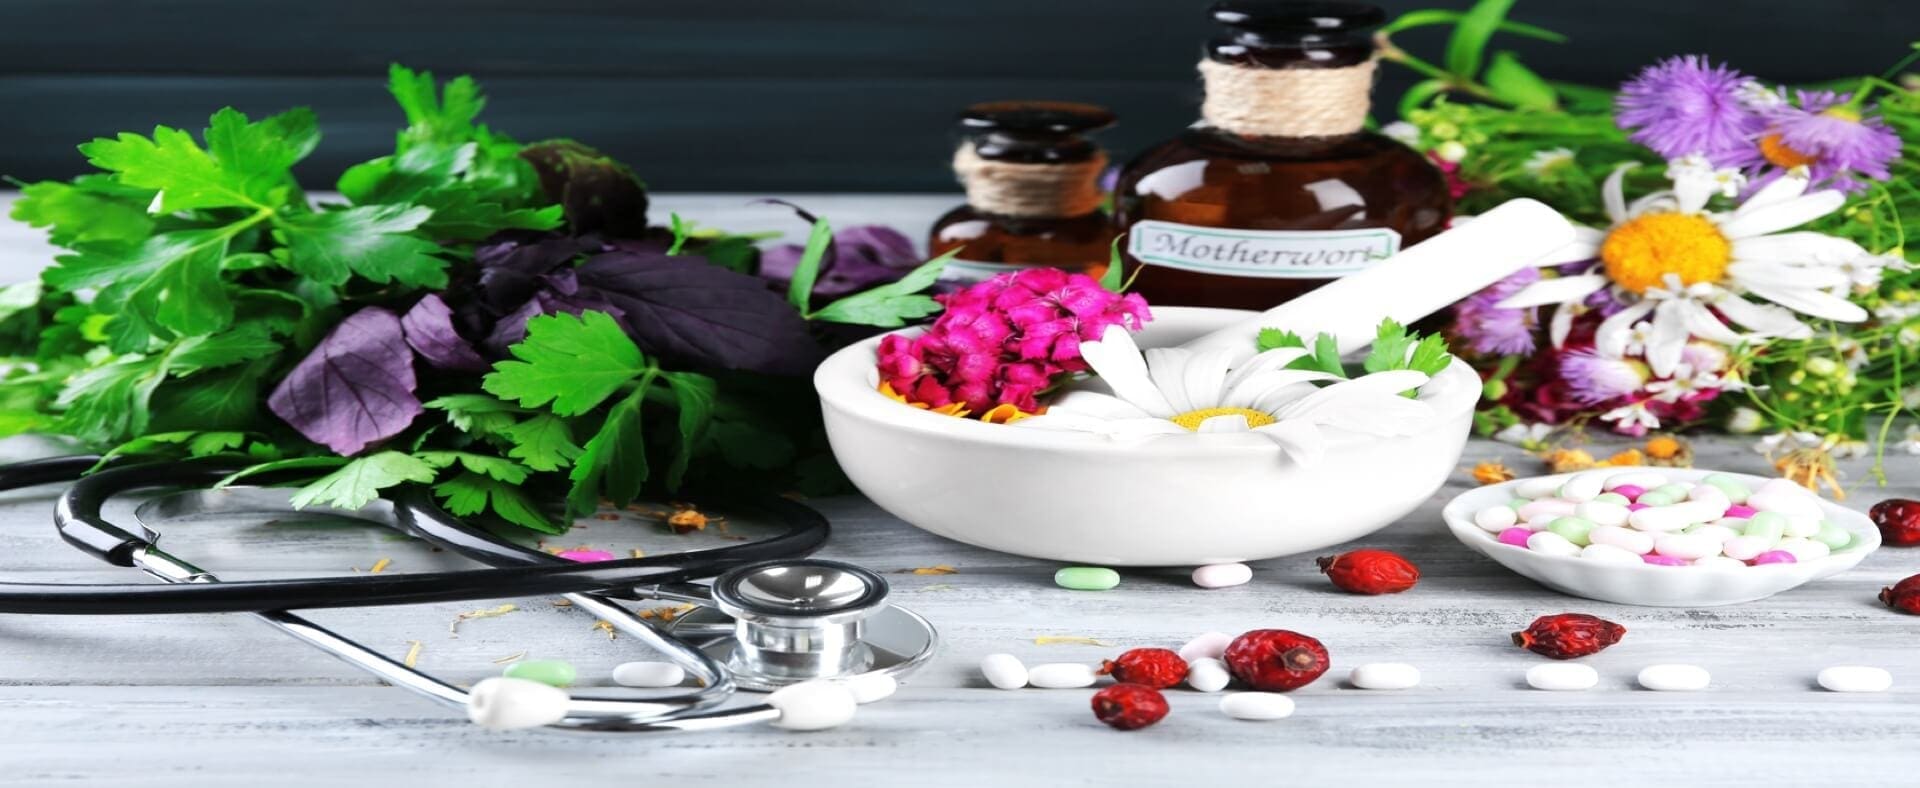 Naturopathic Clinic Policy | Dr. Jiwani Naturopathic Physician Vancouver & Burnaby Surrey